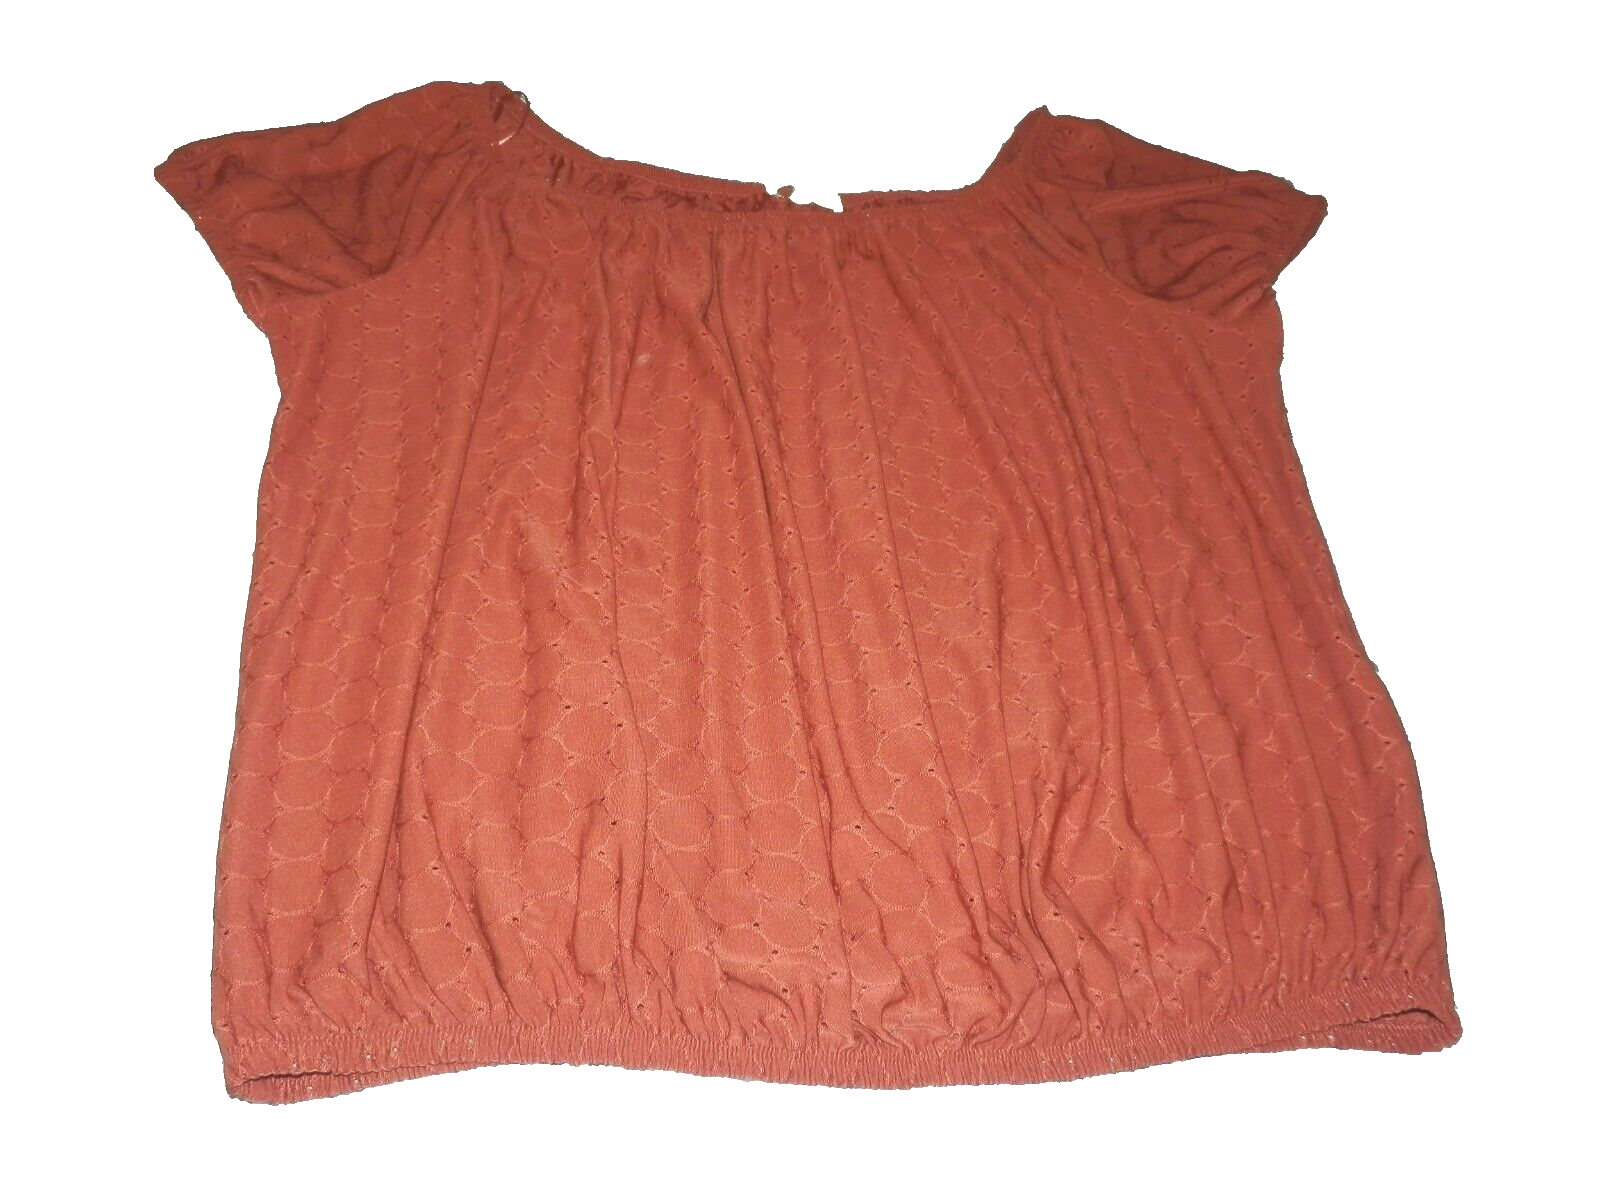 Primary image for NEW Womens XL Kim & Cami Eyelet TOP  Burnt ORANGE Rust S/S Blouson Style